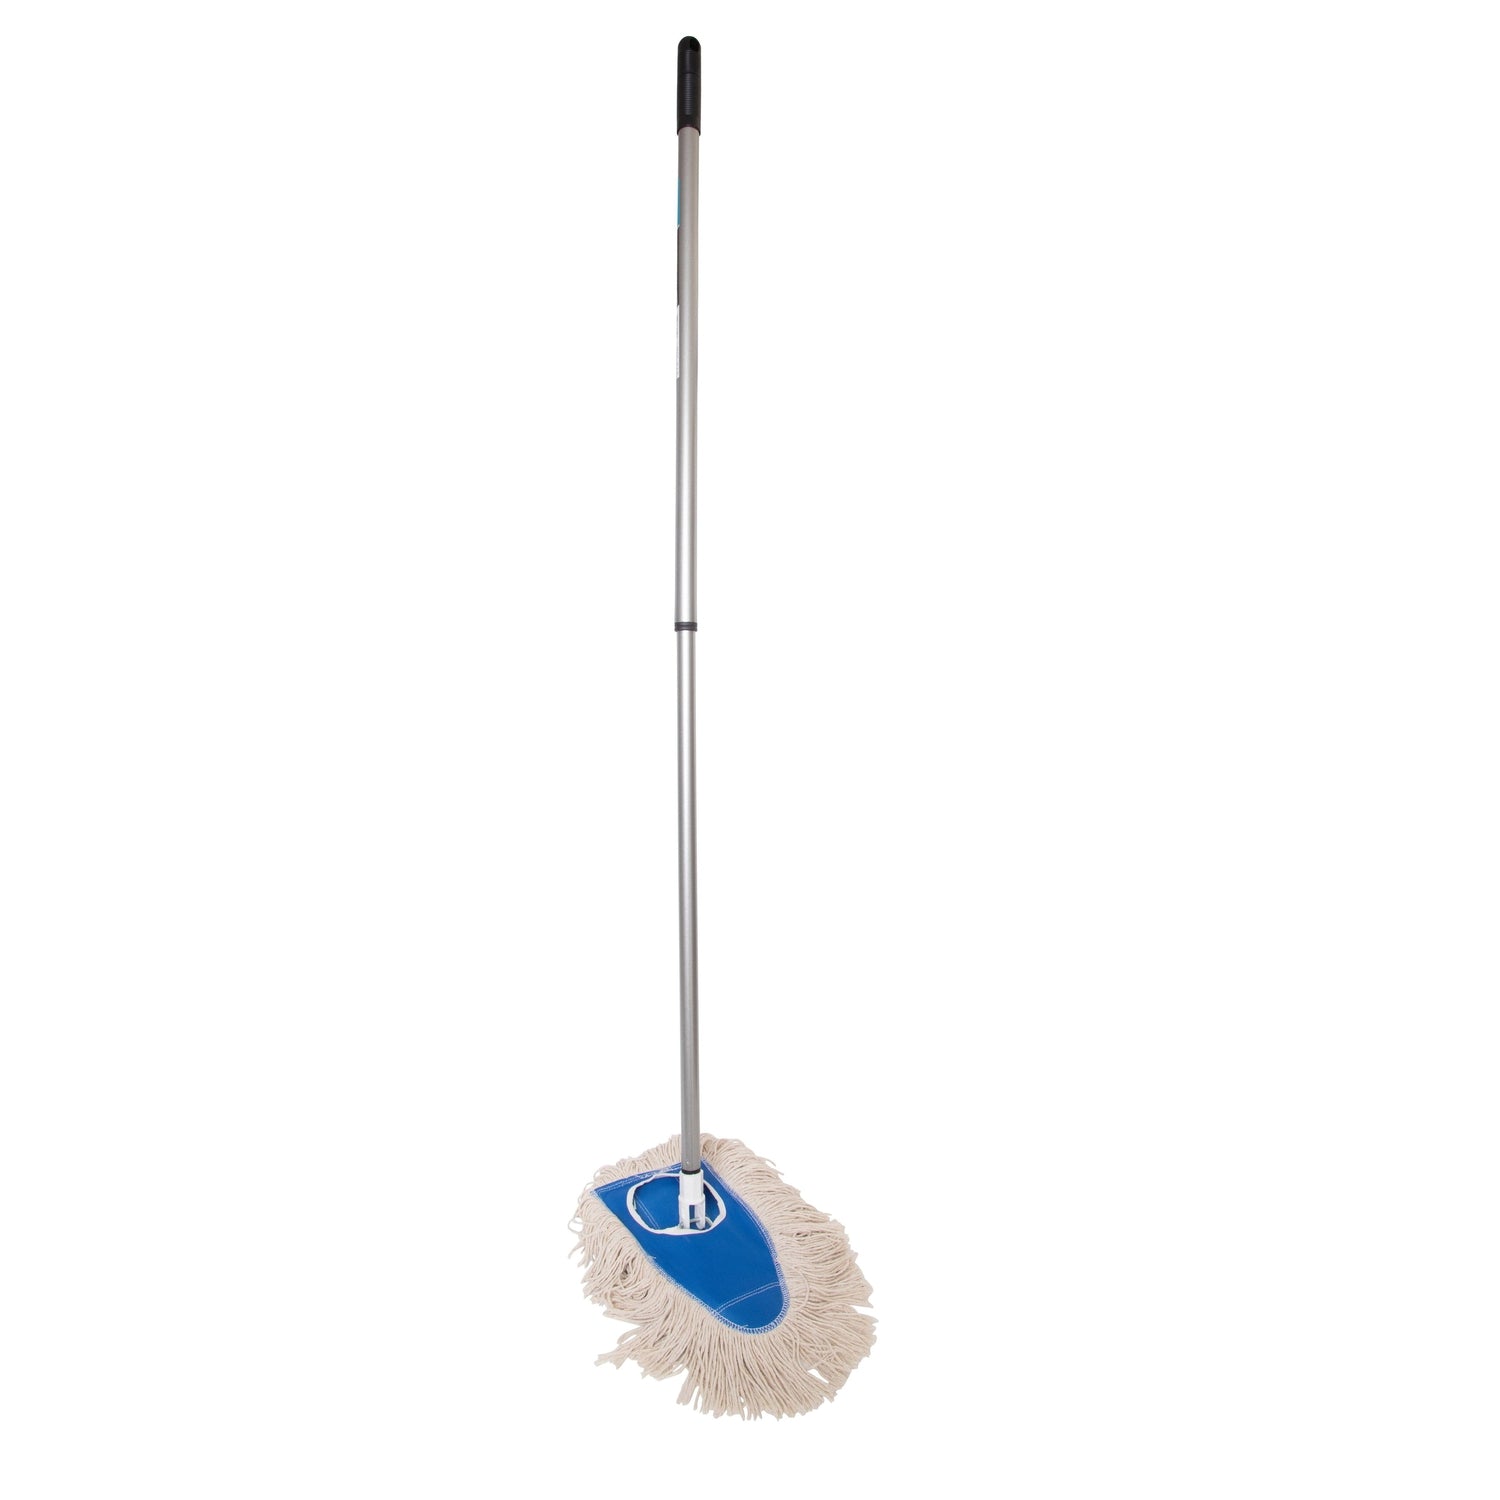 Dry Mop Head With Frame & Adjustable Handle-Duster-Fuller Brush Company